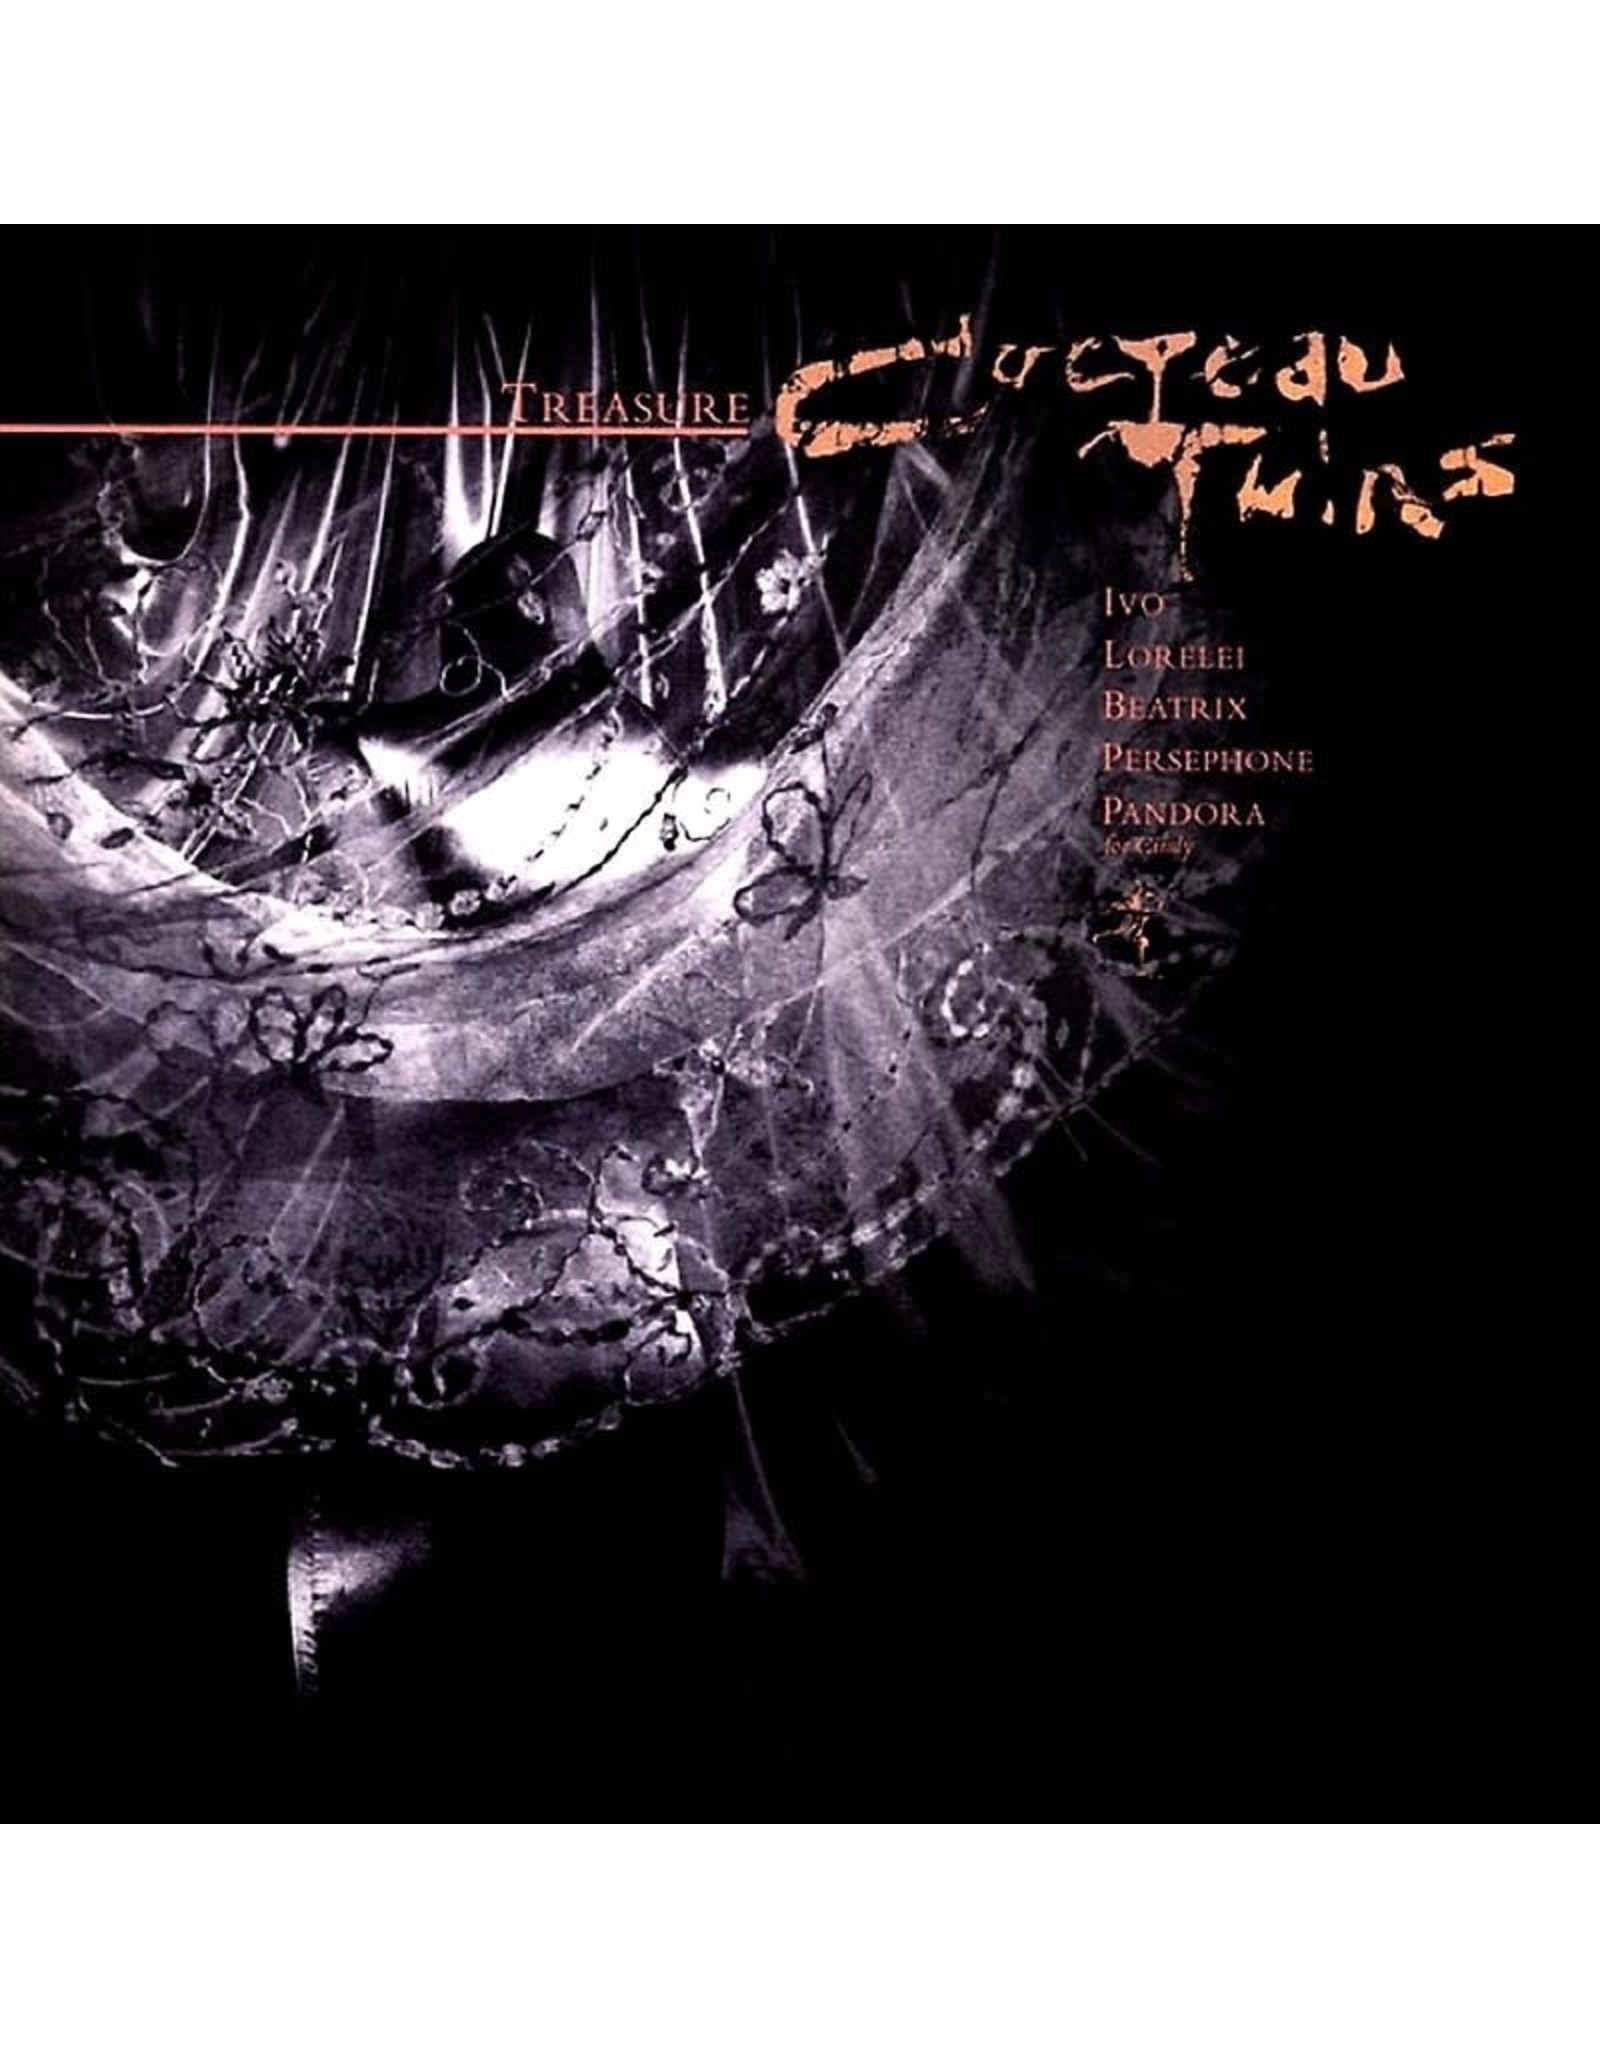 Cocteau Twins - Treasure (remastered/+ download card) LP